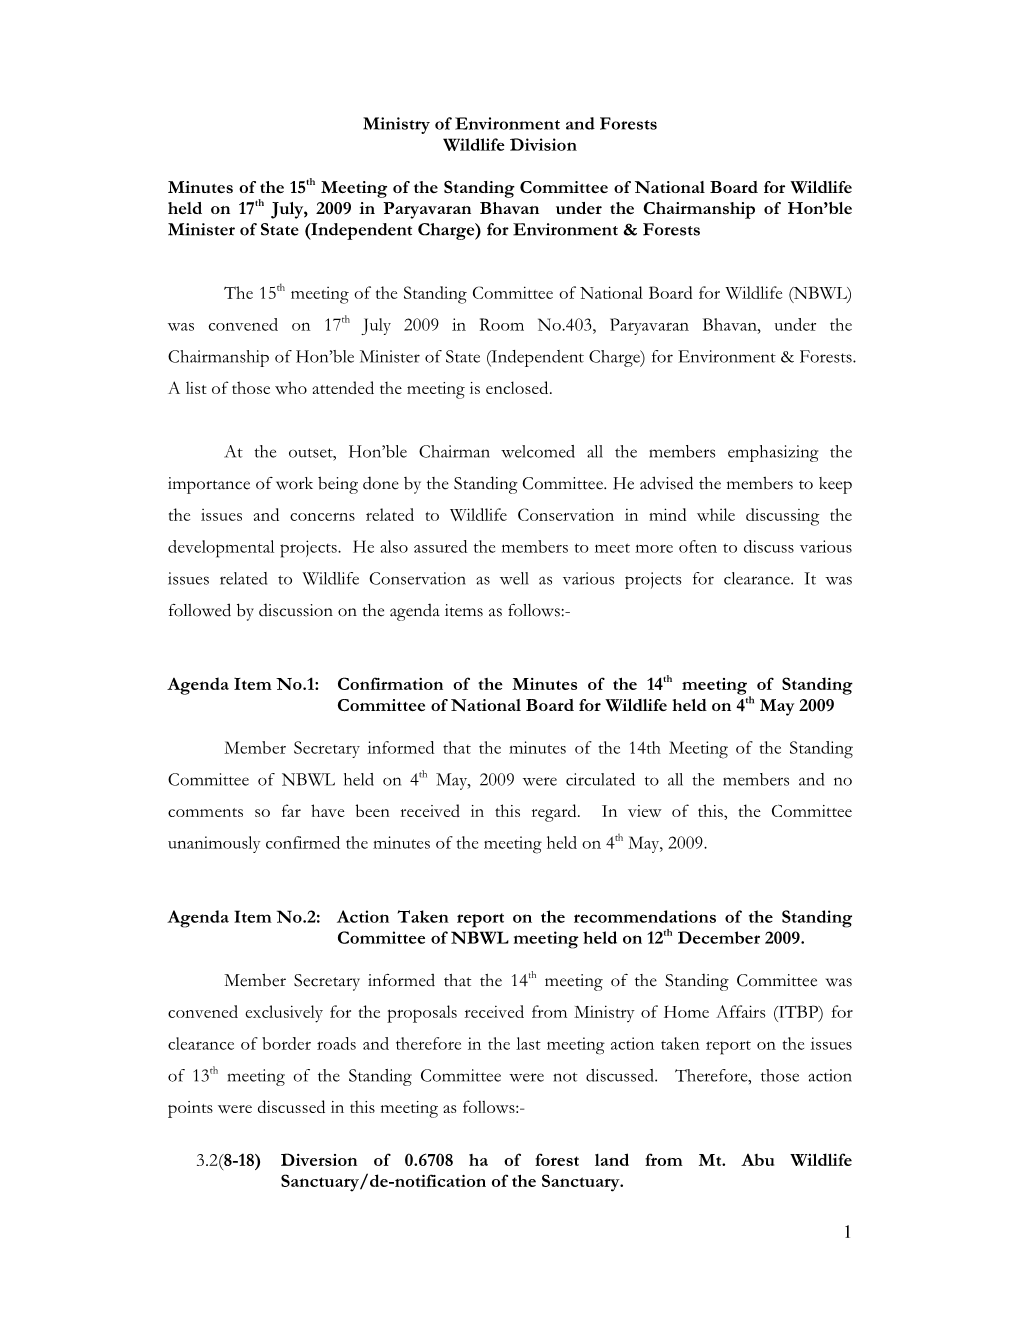 1 Ministry of Environment and Forests Wildlife Division Minutes of the 15Th Meeting of the Standing Committee of National Board